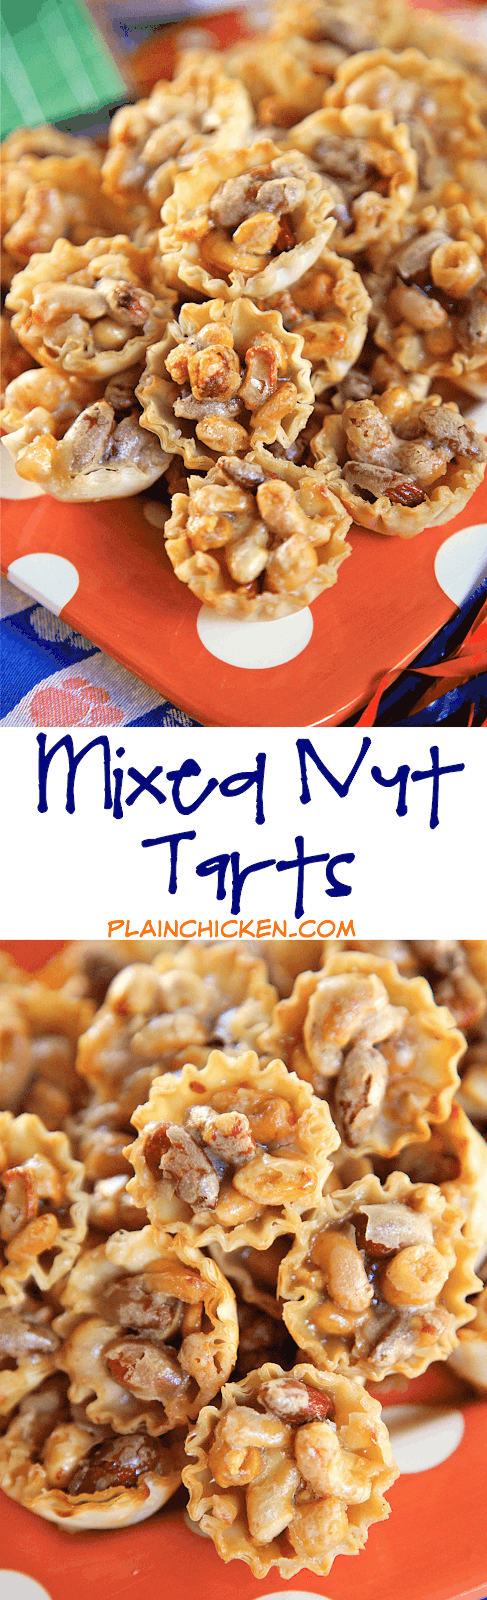 Mixed Nut Tarts - honey roasted mixed nuts tossed in a homemade caramel sauce and baked in mini phyllo shells. Ready in 15 minutes! Great for parties and your holiday table! Double the recipe - they were gone in a flash!! Can make up to 2 days in advance.